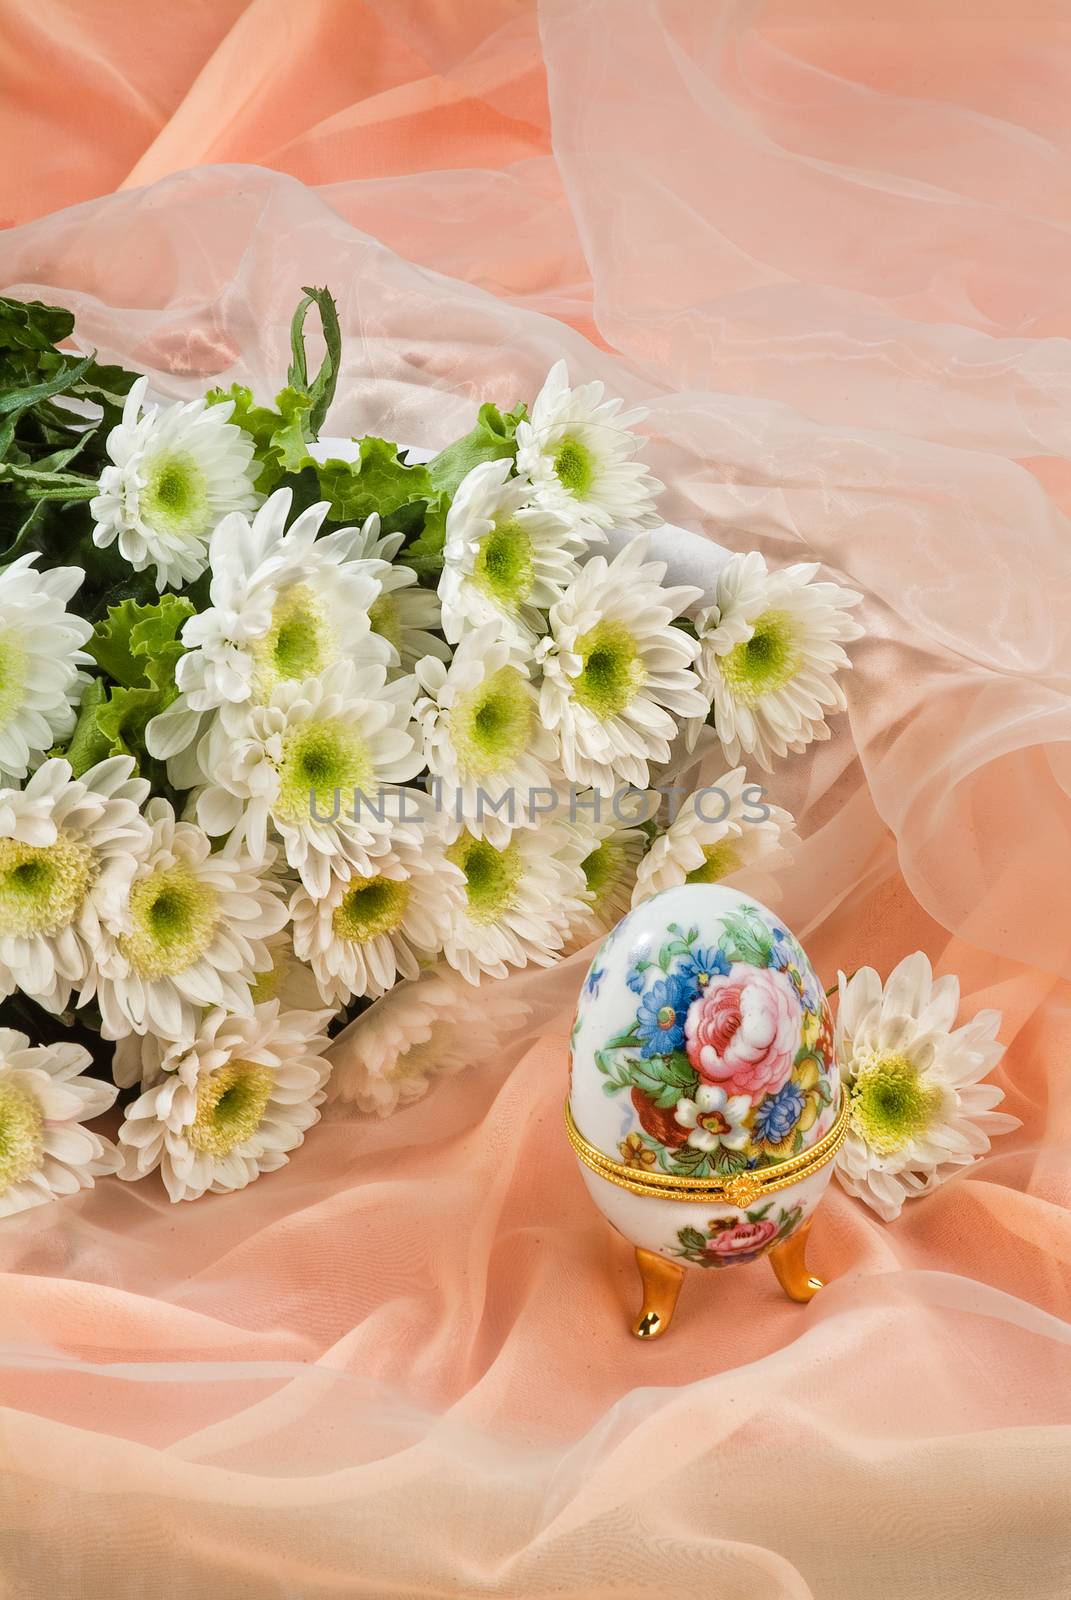 Still life with bouquet of flowers and accessories on a studio background